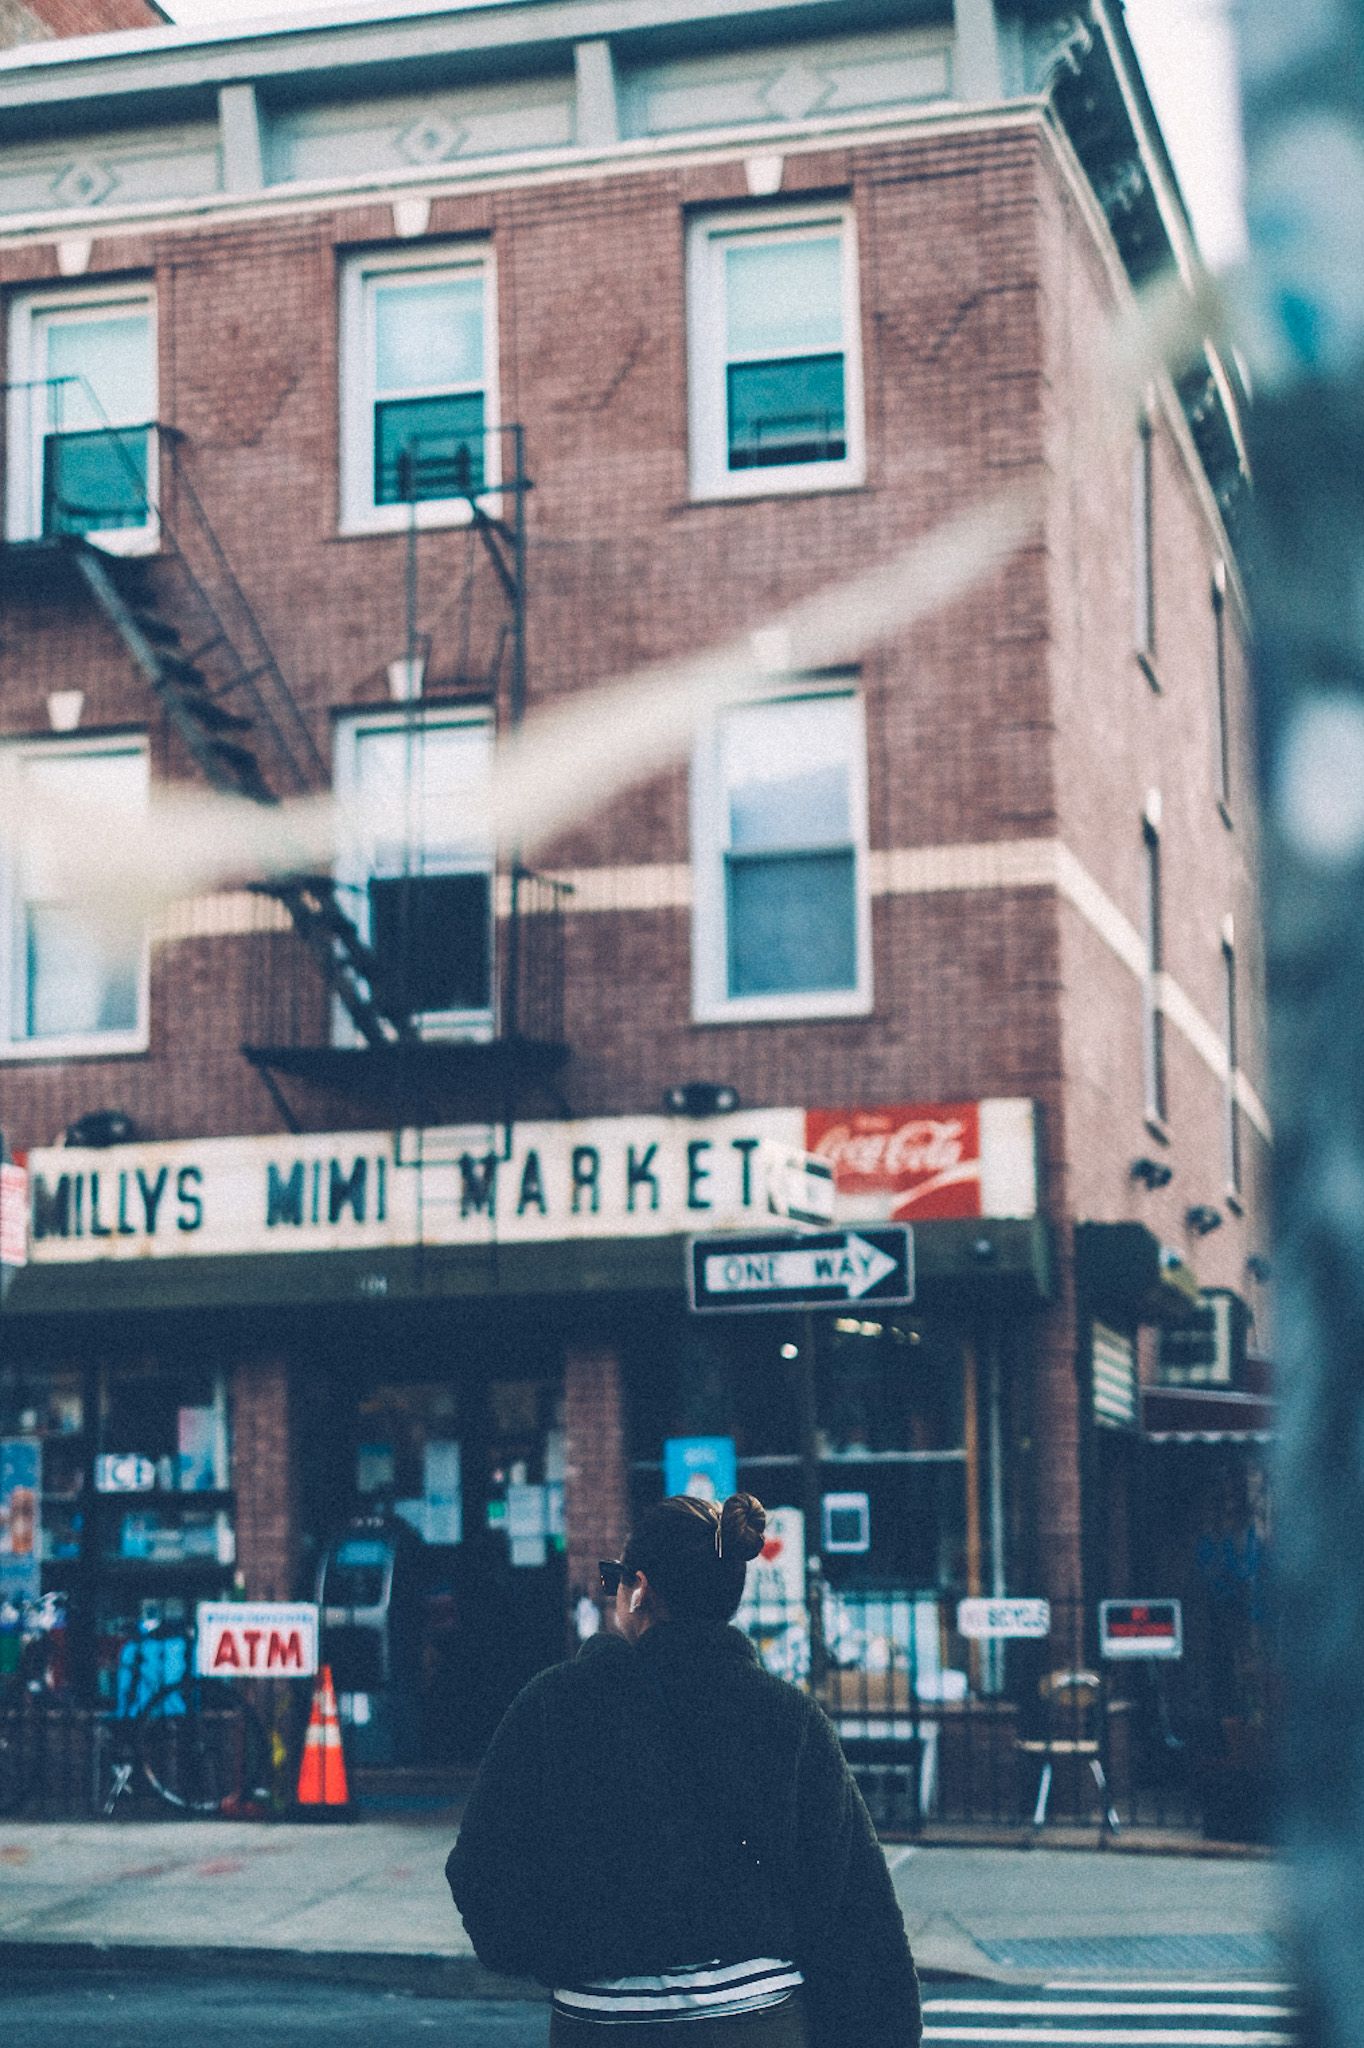 From across the street, a sign on a three-story brick building says Milly’s Mini Mart. A woman is crossing the street and a piece of tape from the telephone pole blows across the foreground.